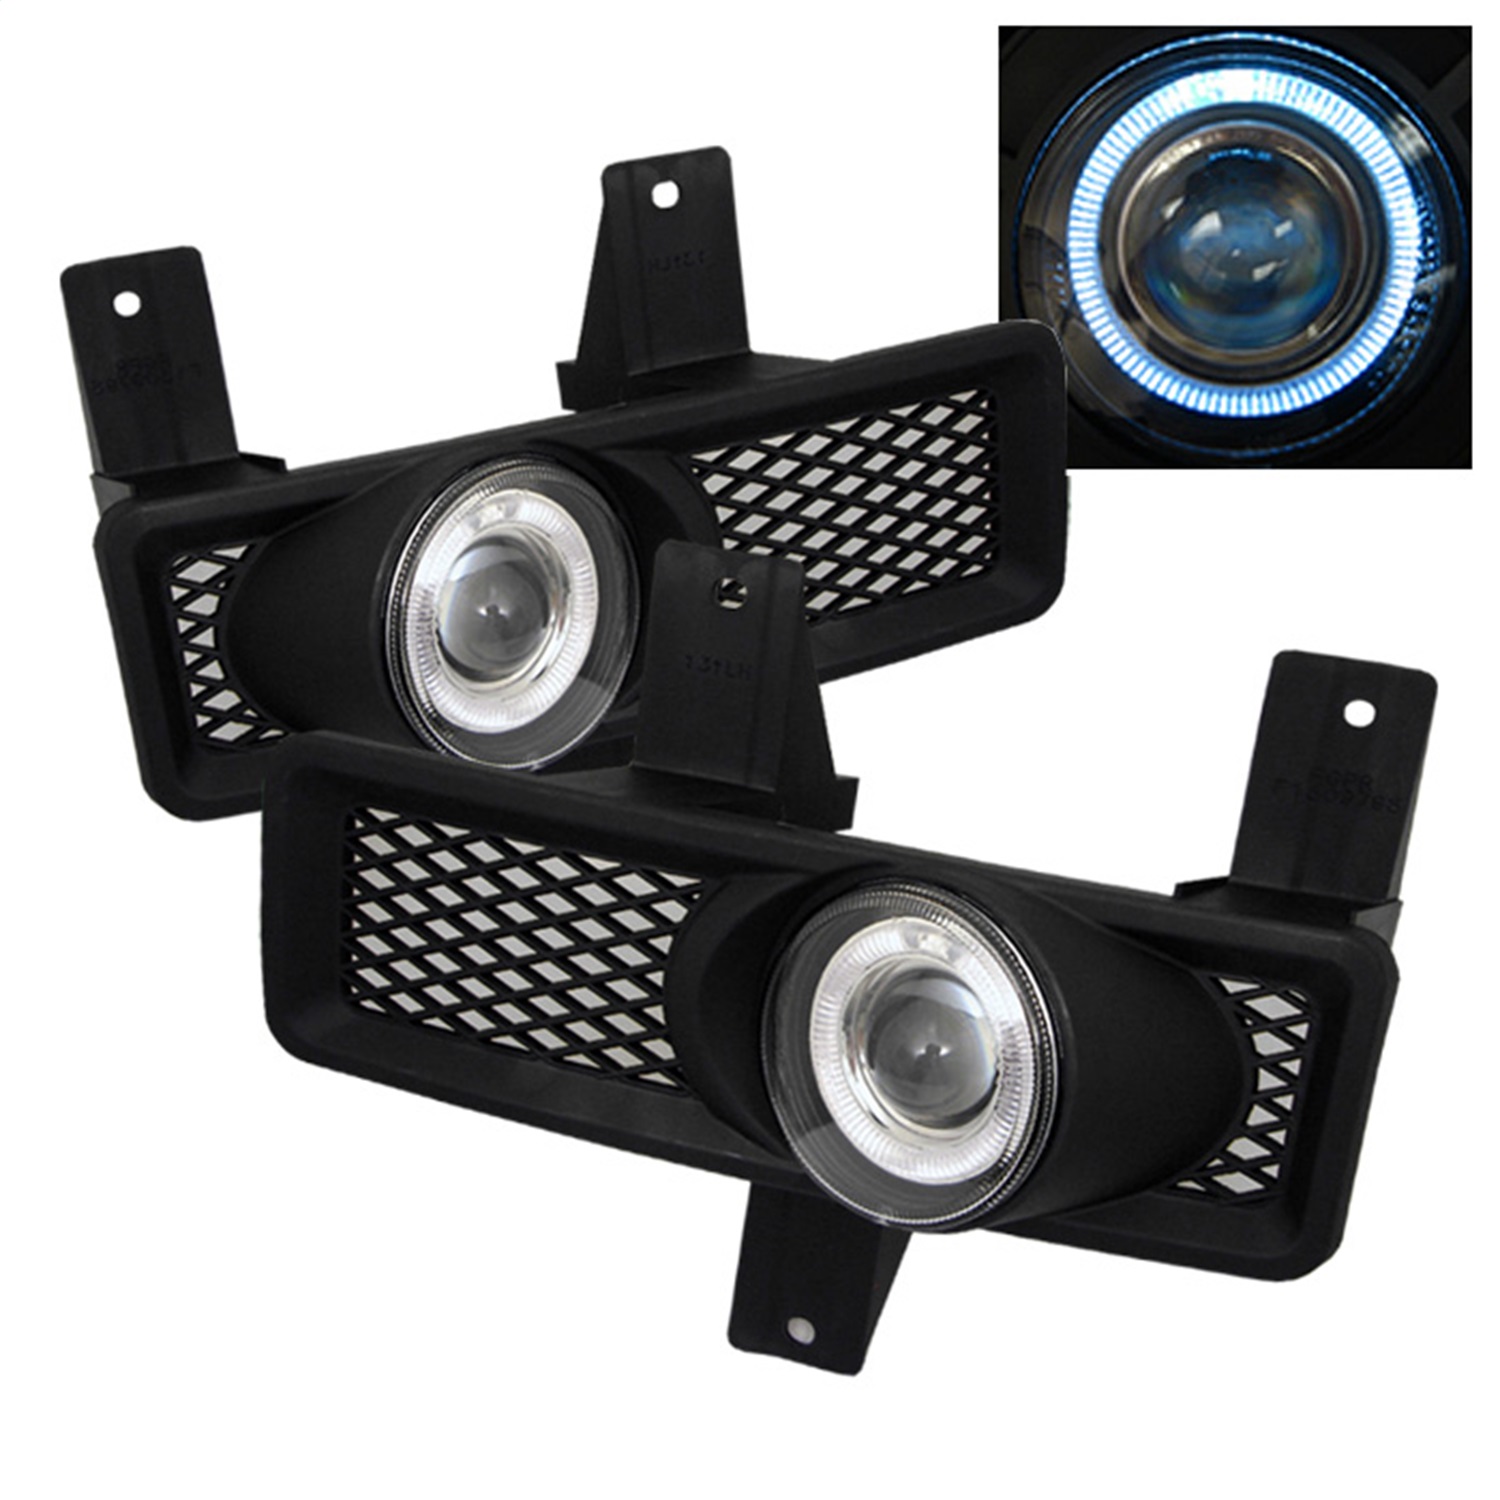 Spyder Auto 5021328 Halo Projector Fog Lights Fits 97-98 Expedition F-150 F-250